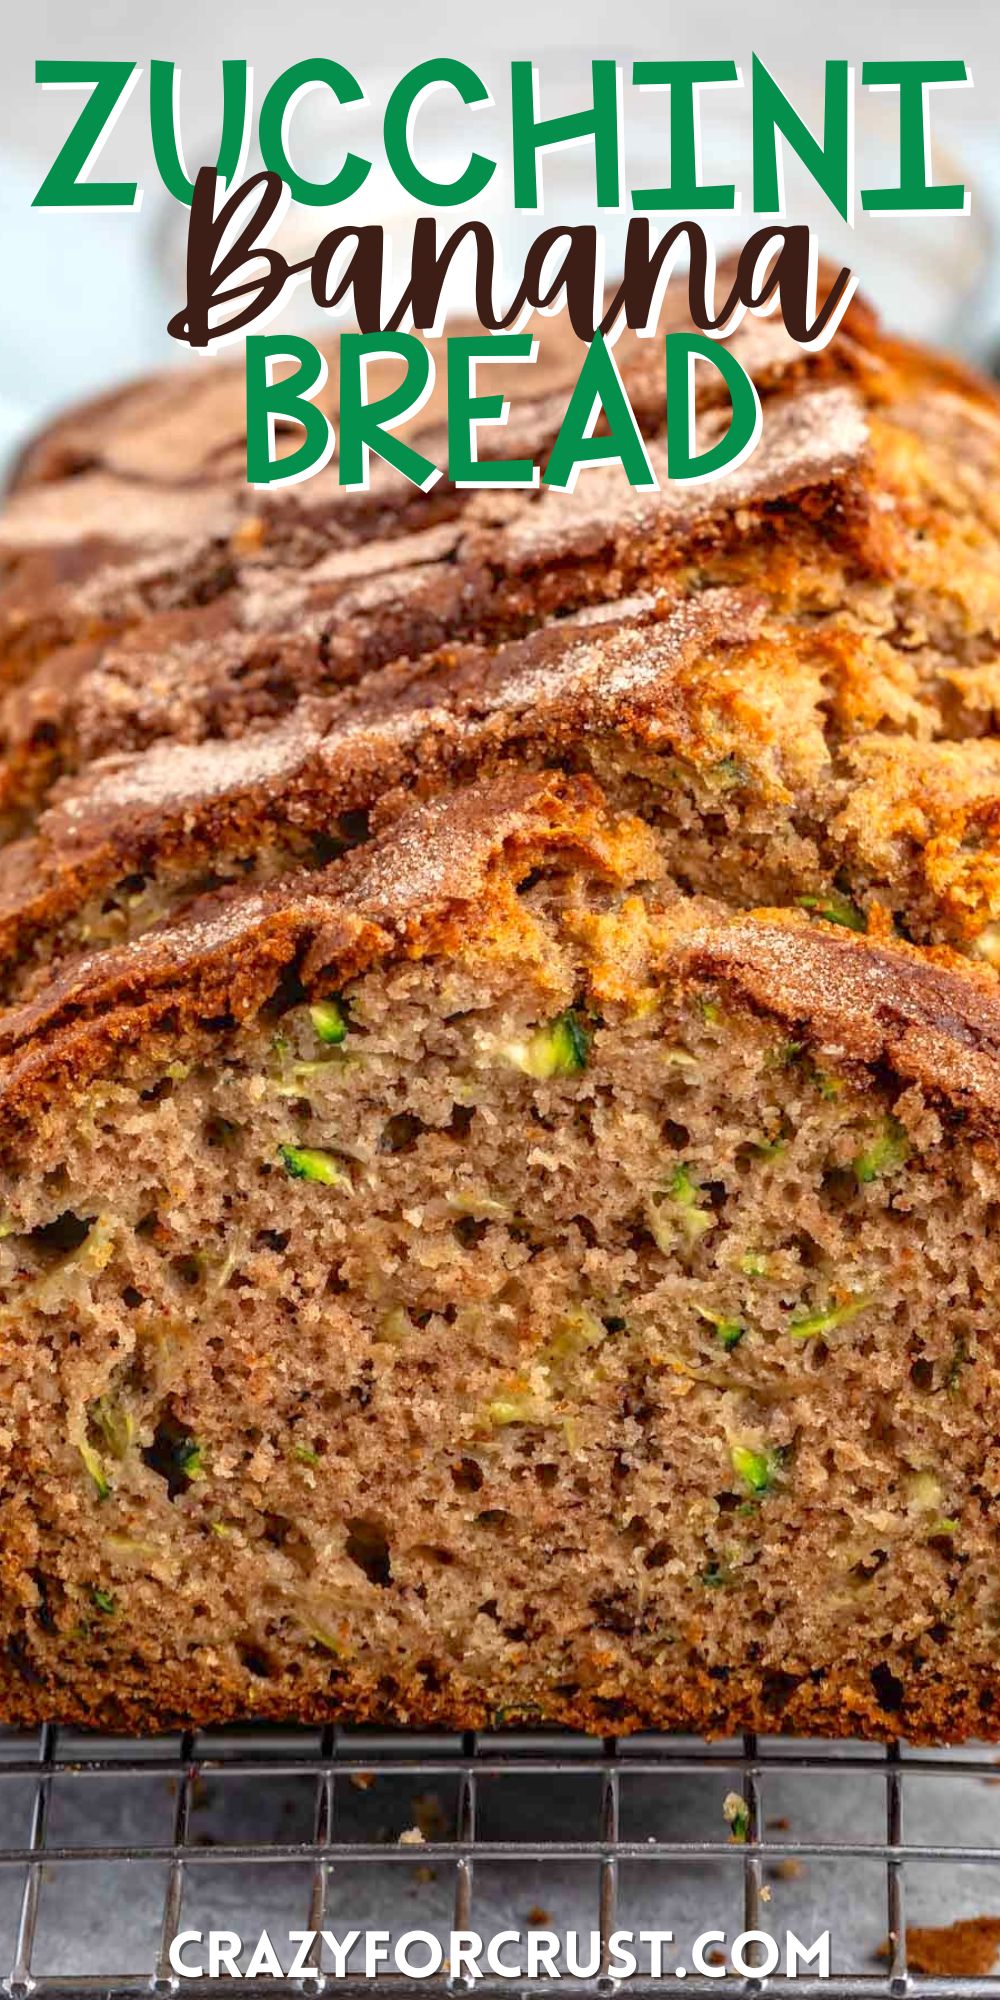 sliced banana bread with shredded zucchini baked inside with words on the image.